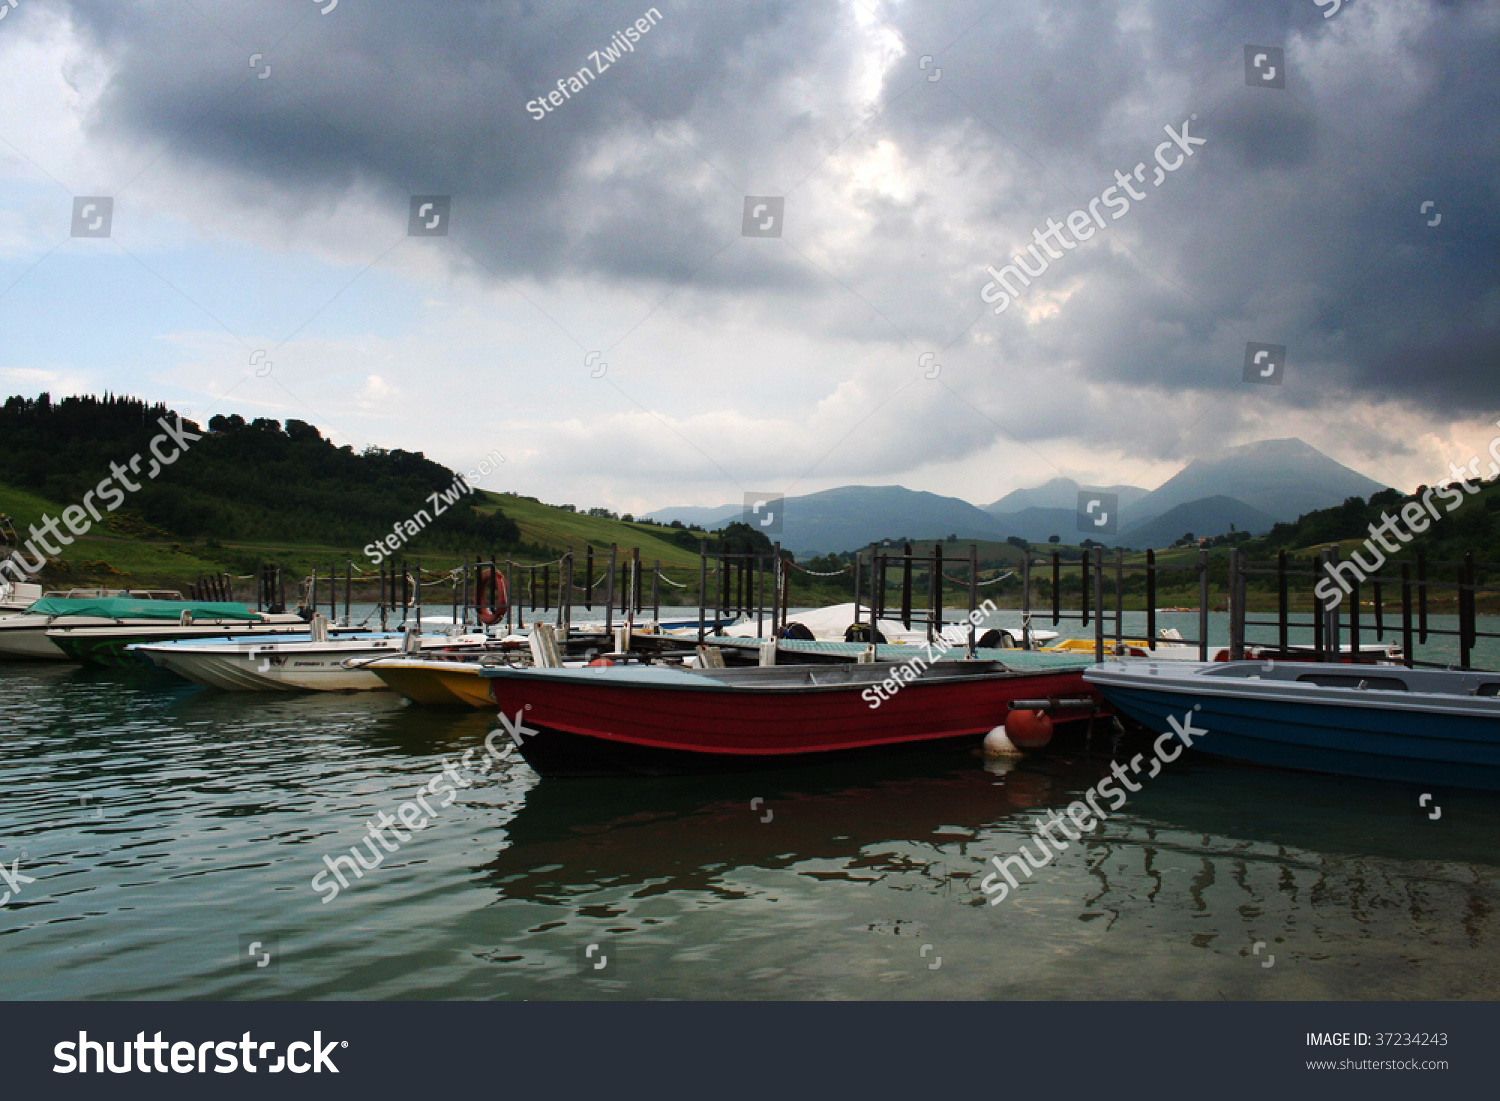 Boats on a lake with mountains in the background #37234243